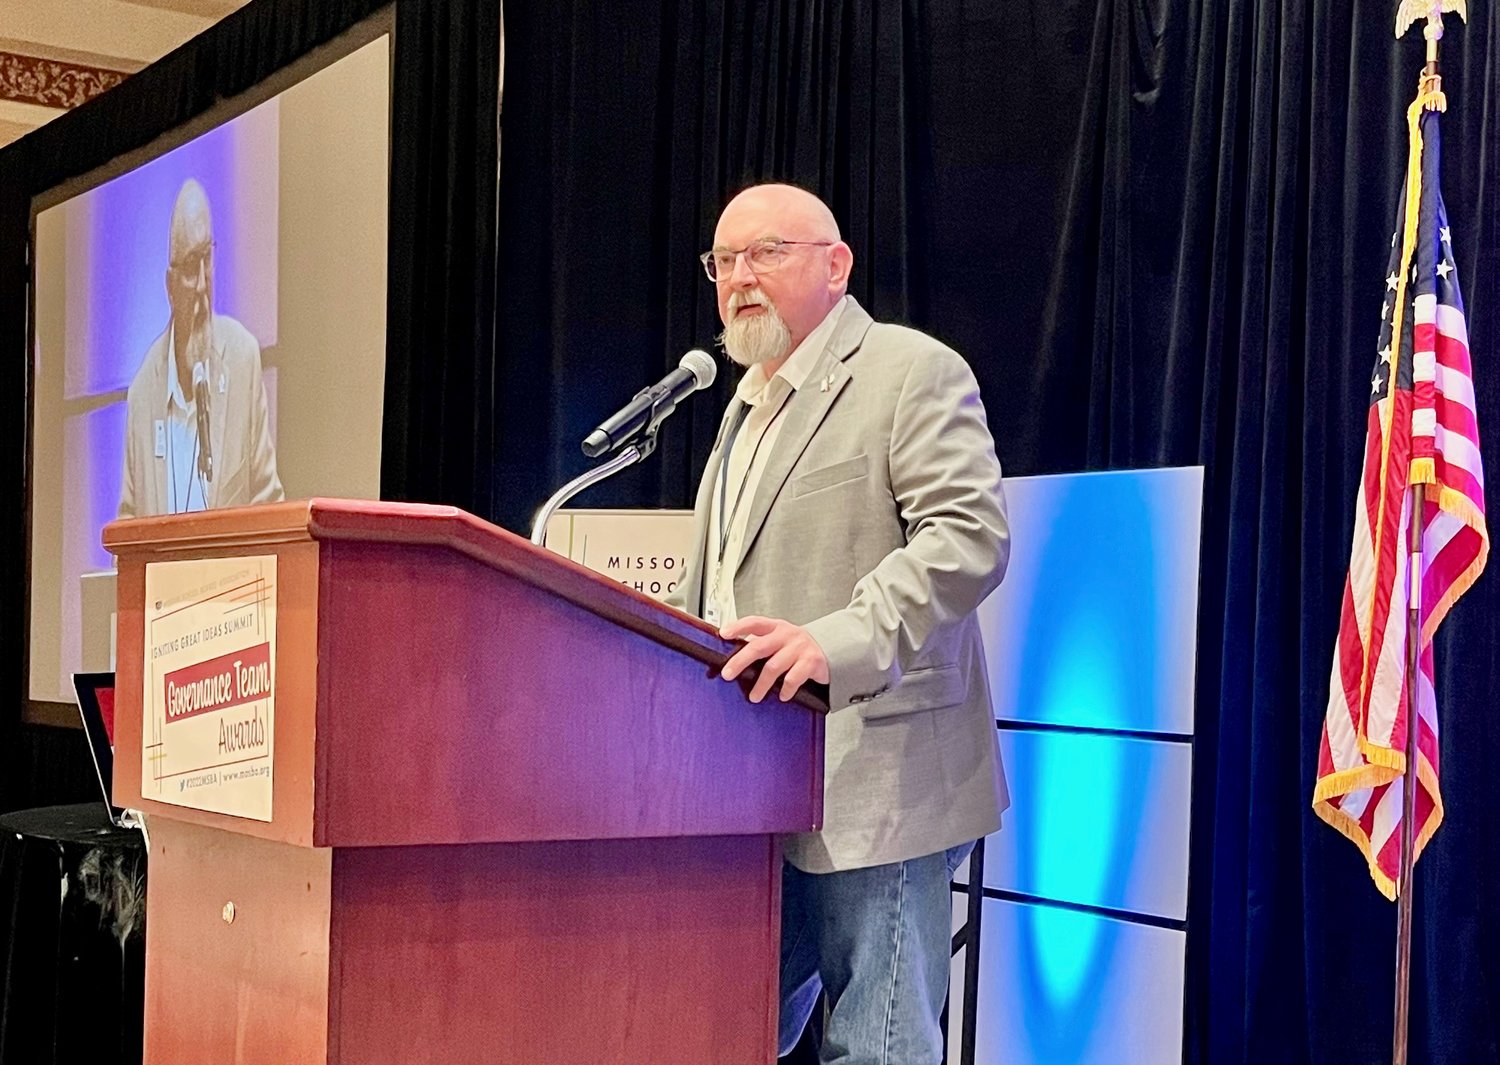 Ray Murphy, newly-elected president of the Missouri School Boards’ Association, addresses fellow board members during the association’s Great Ideas Summit held Friday through Sunday in St. Charles. Murphy is a member of the Richards R-5 School Board in West Plains.